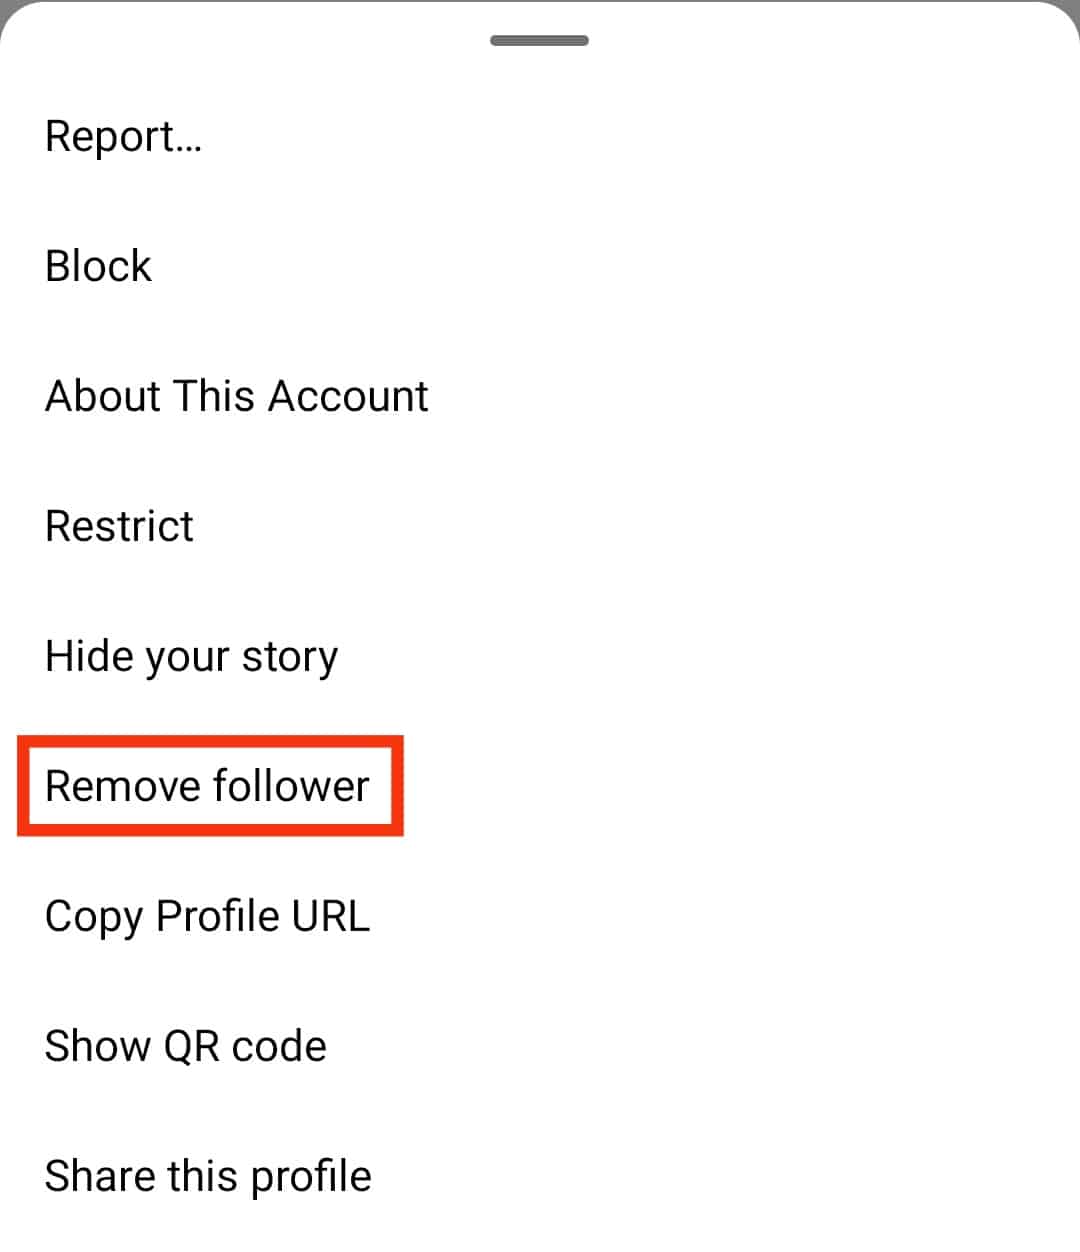 You Should Get The Option Of Remove Follower